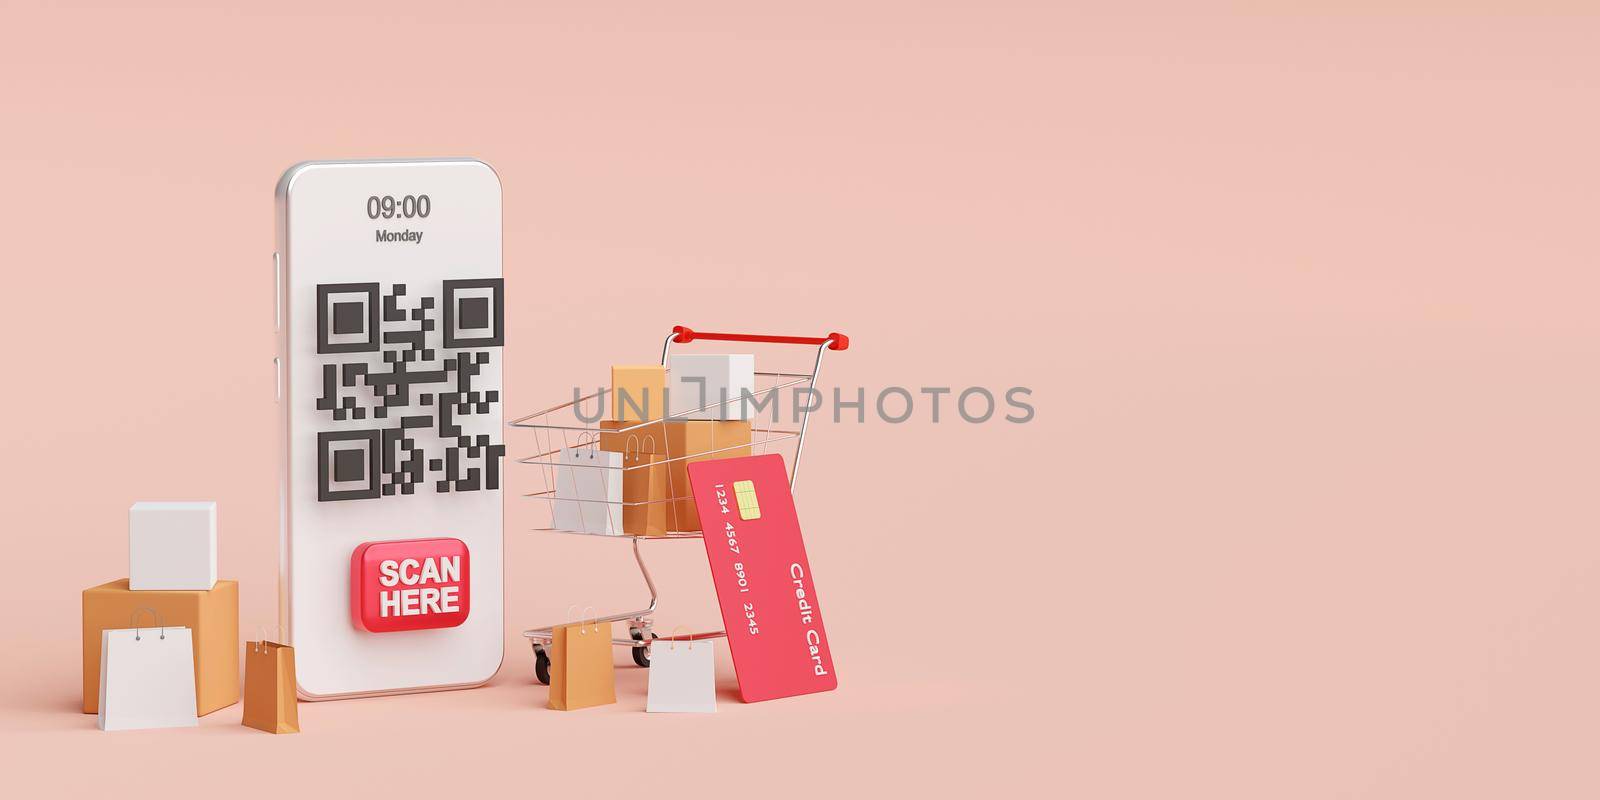 Payment on mobile concept, QR code scanning on mobile making payment and verification, 3d illustration